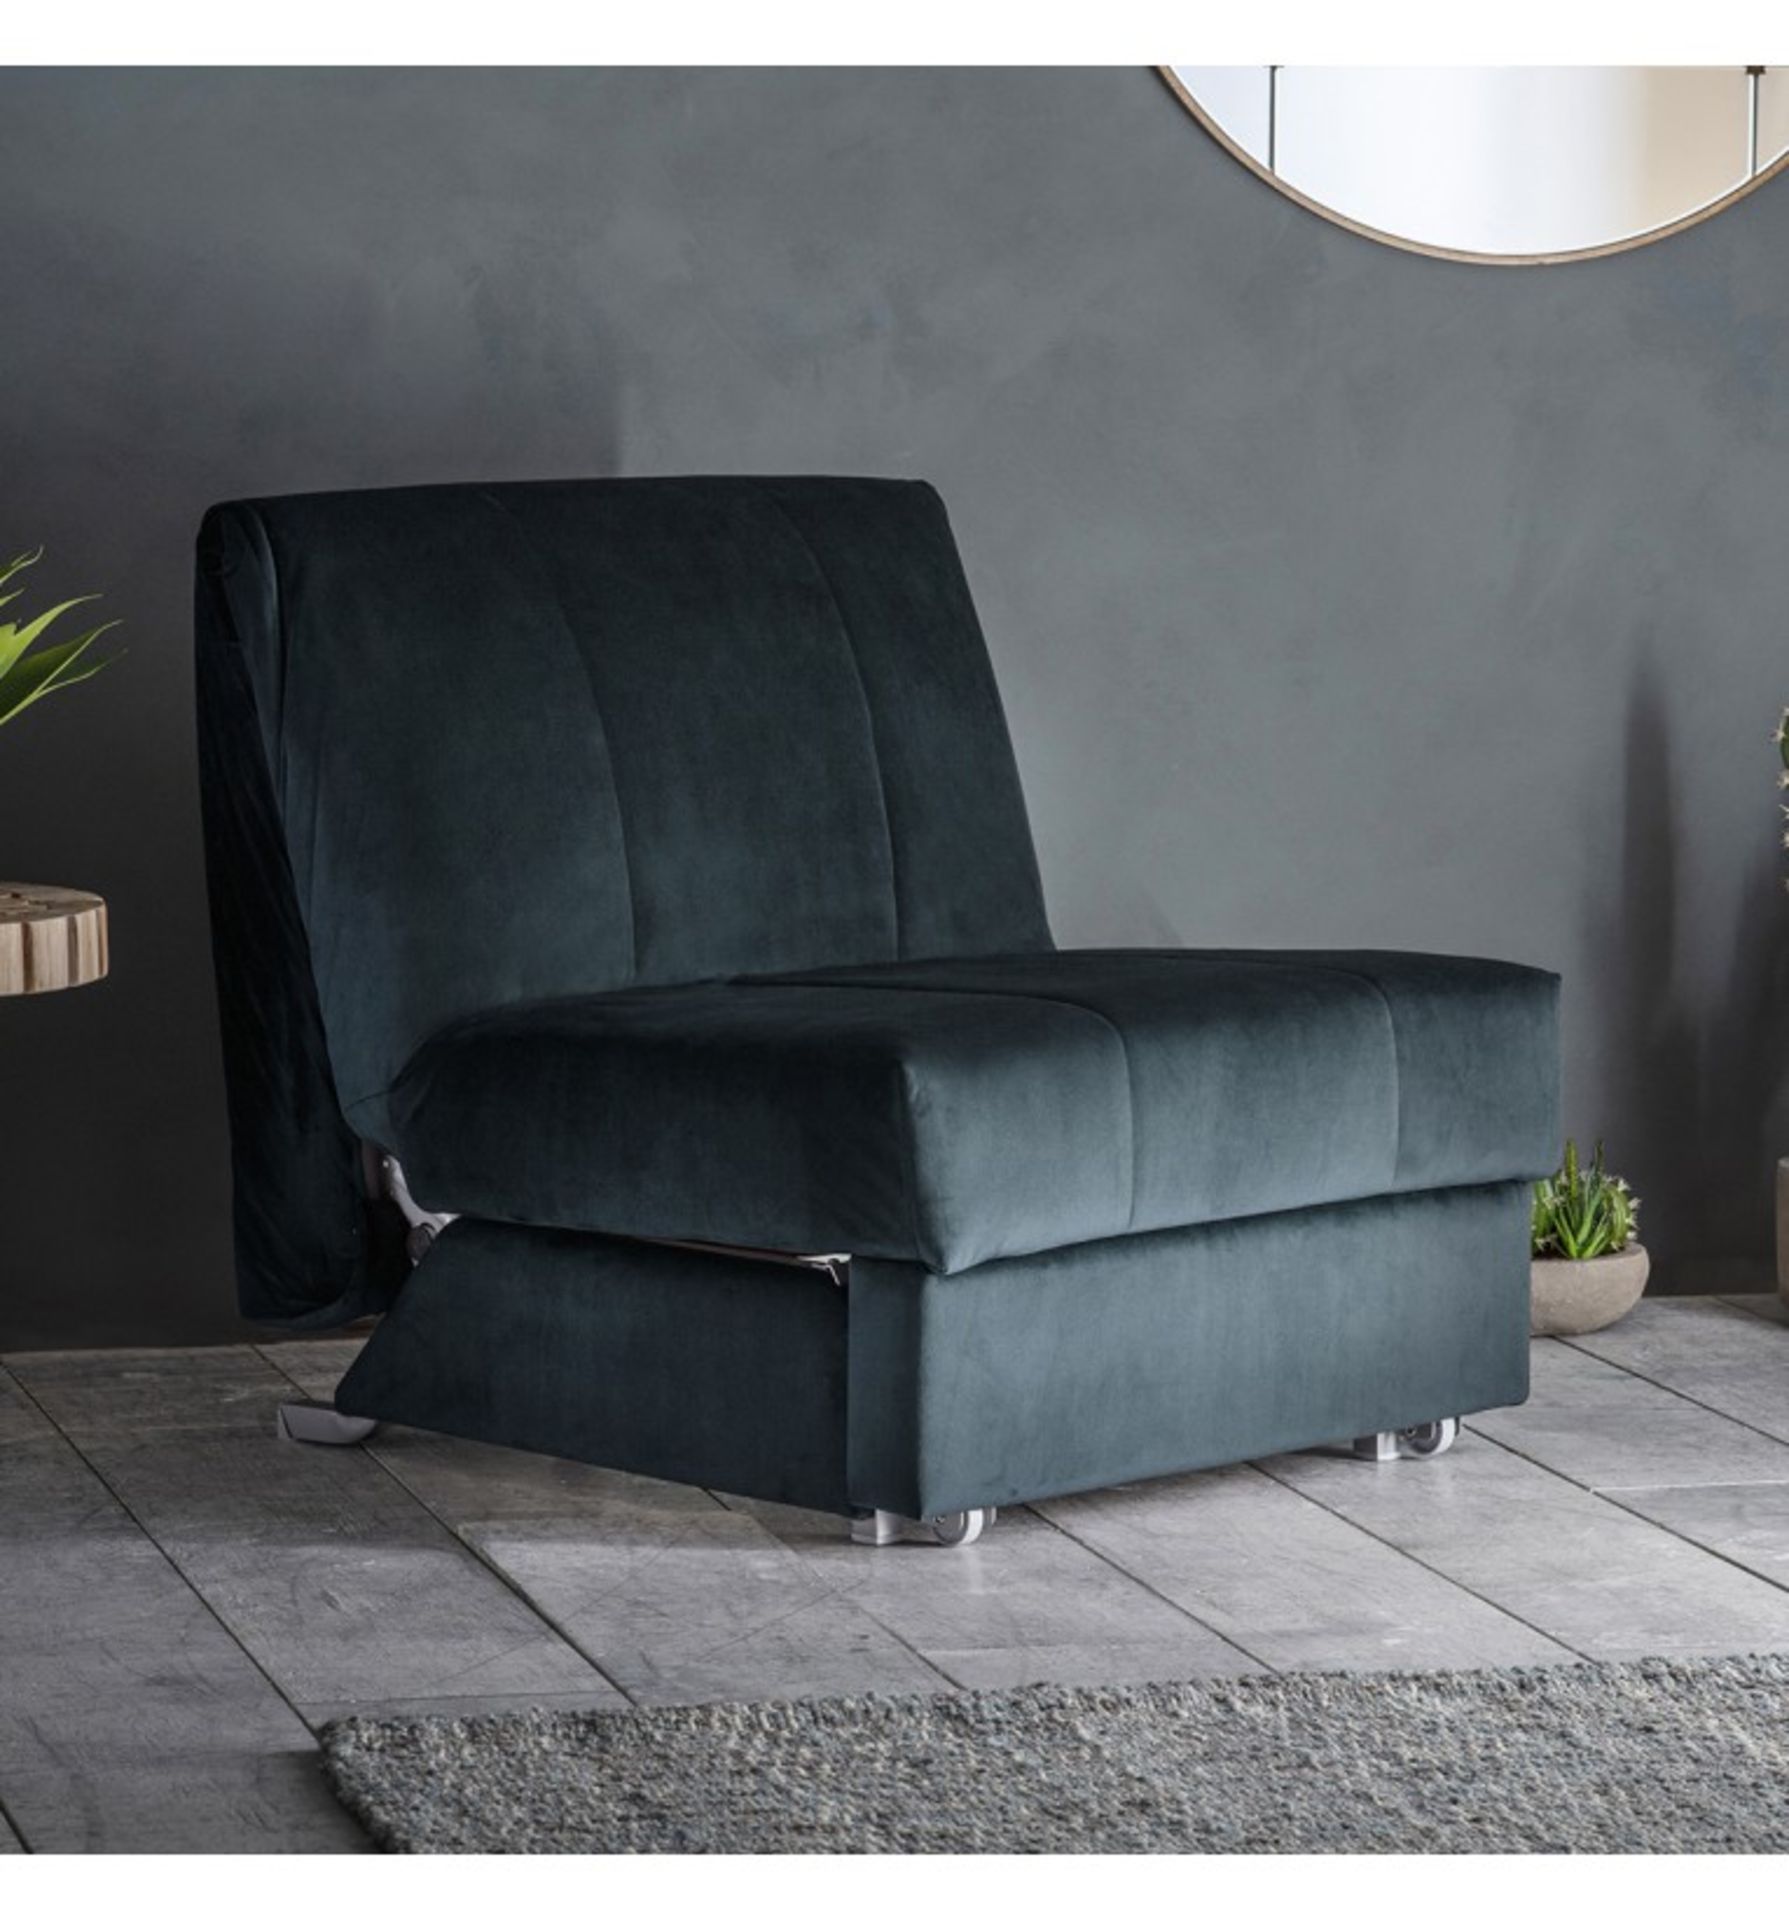 Metz Sofa 80cm Rinaldi Pewter Upholstered The Metz collection is ideal even for smaller spaces,